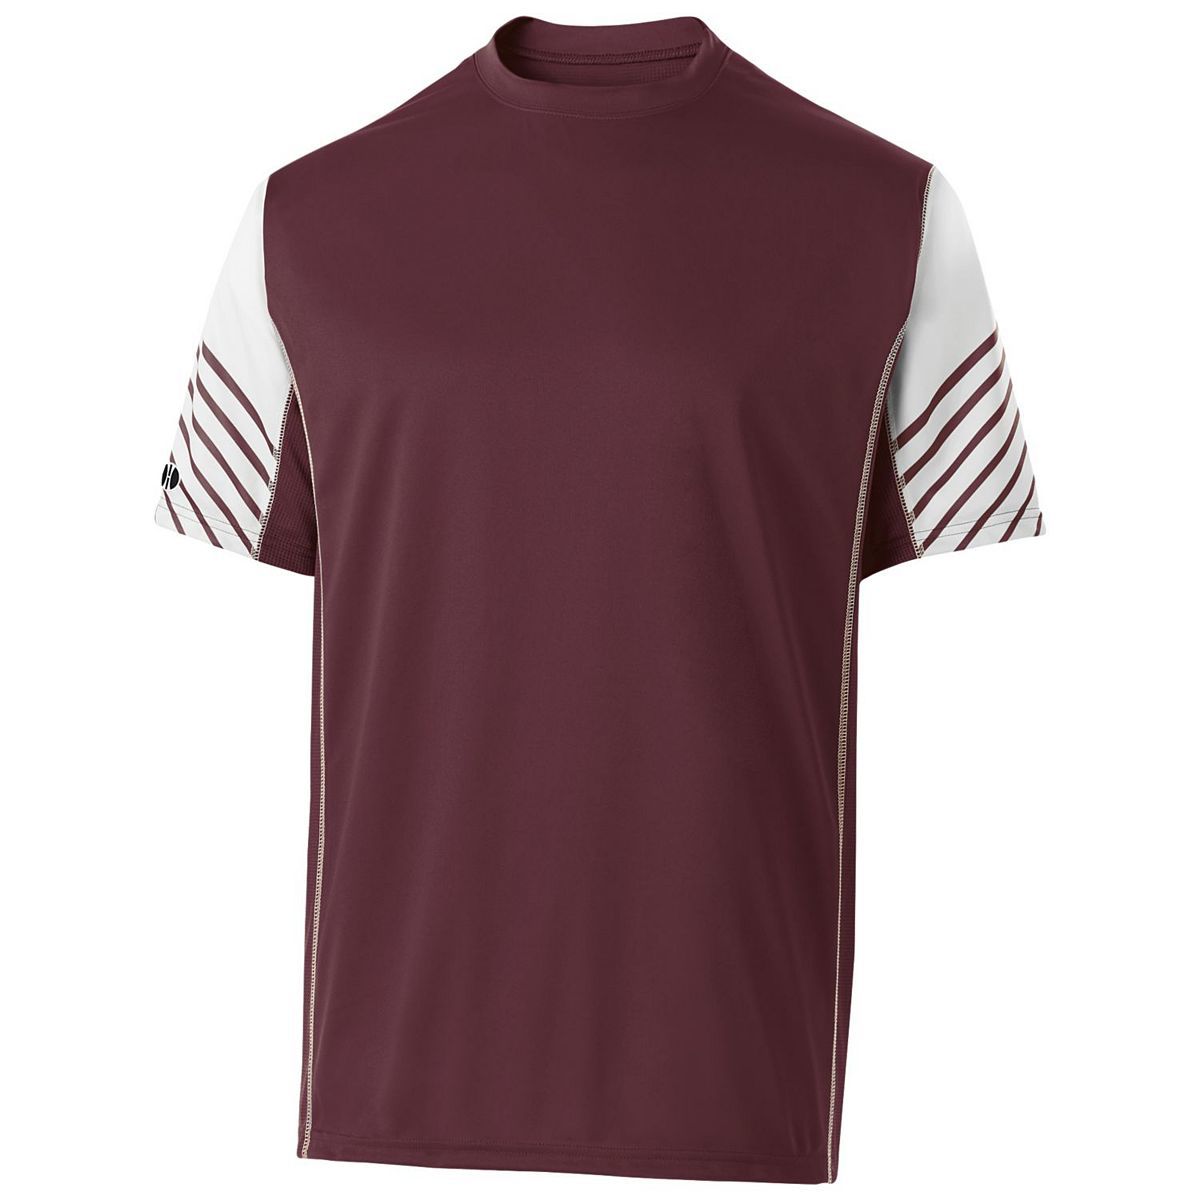 Holloway Youth Arc Short Sleeve Shirt in Maroon/White  -Part of the Youth, Holloway, Shirts product lines at KanaleyCreations.com